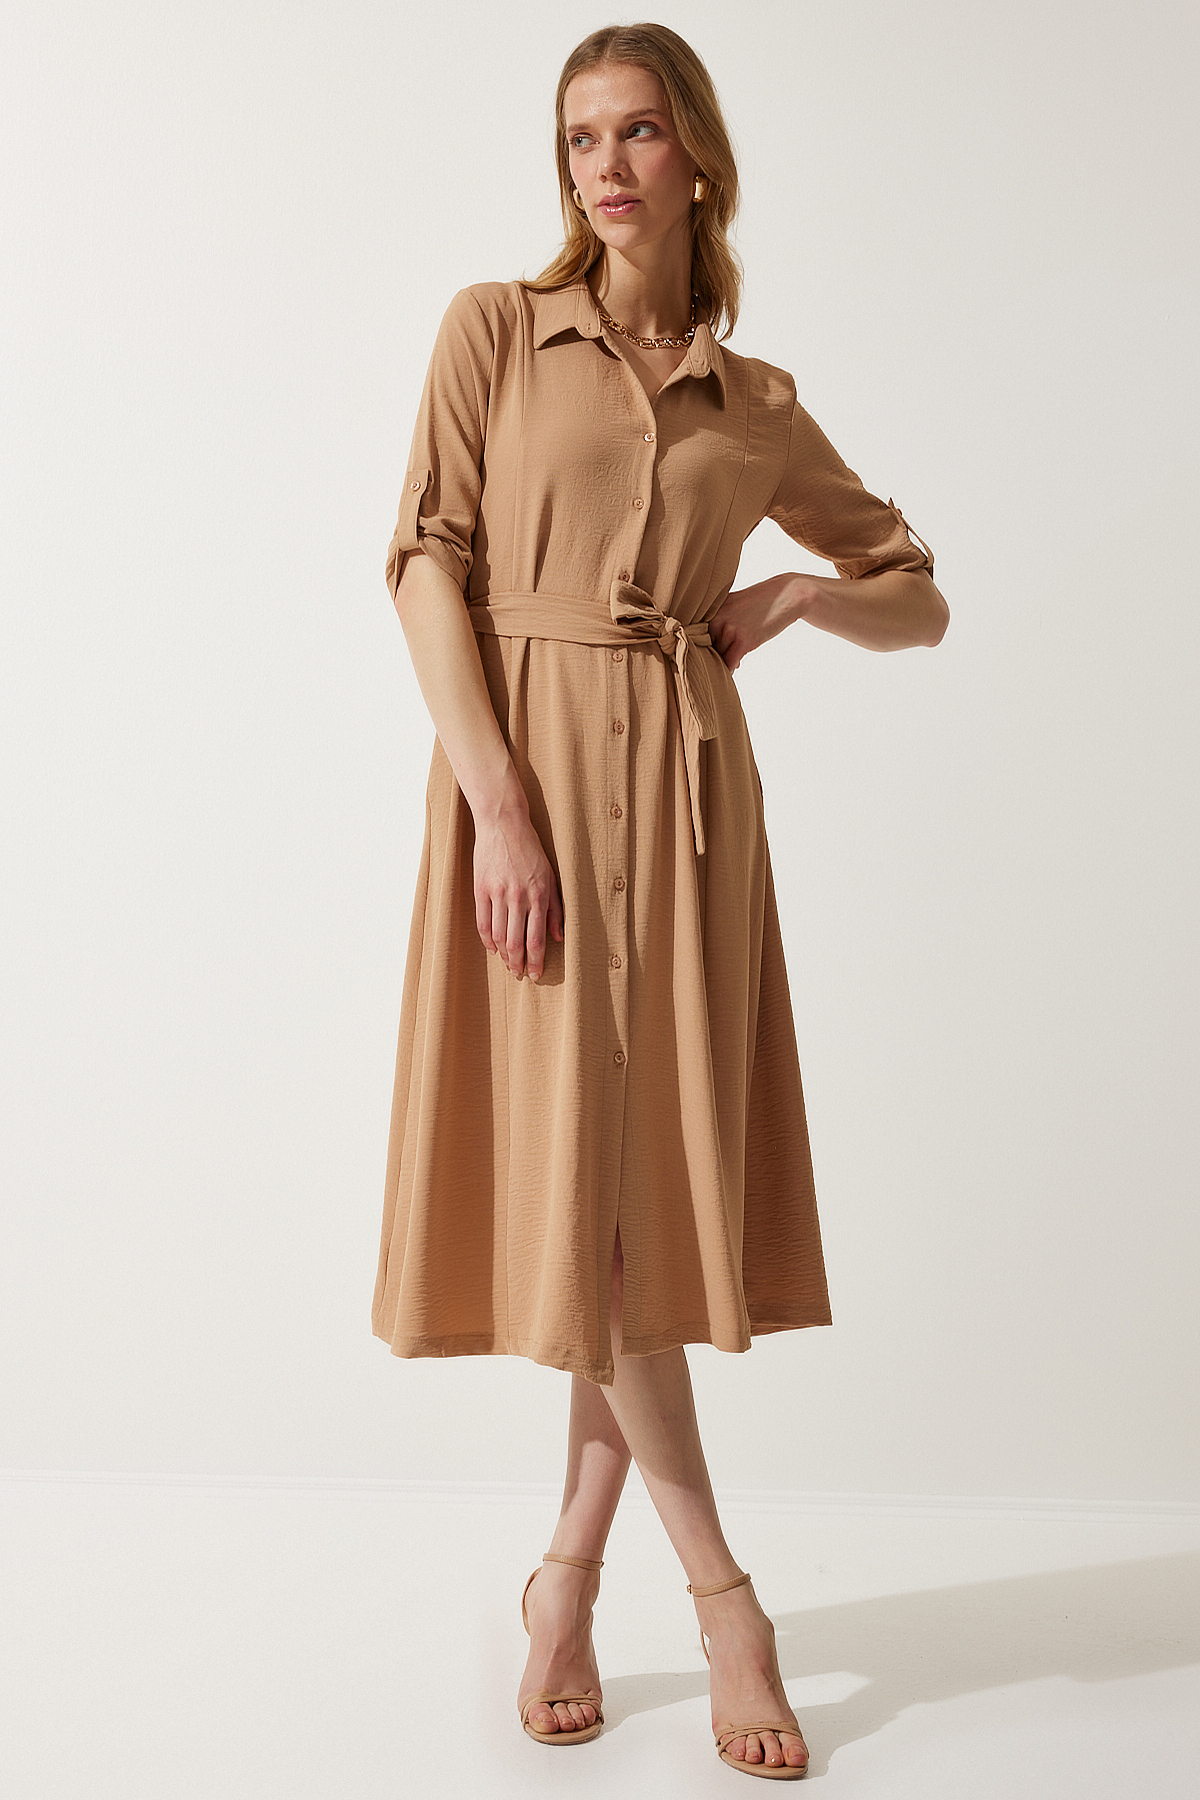 Happiness İstanbul Women Camel Belted Shirt Dress